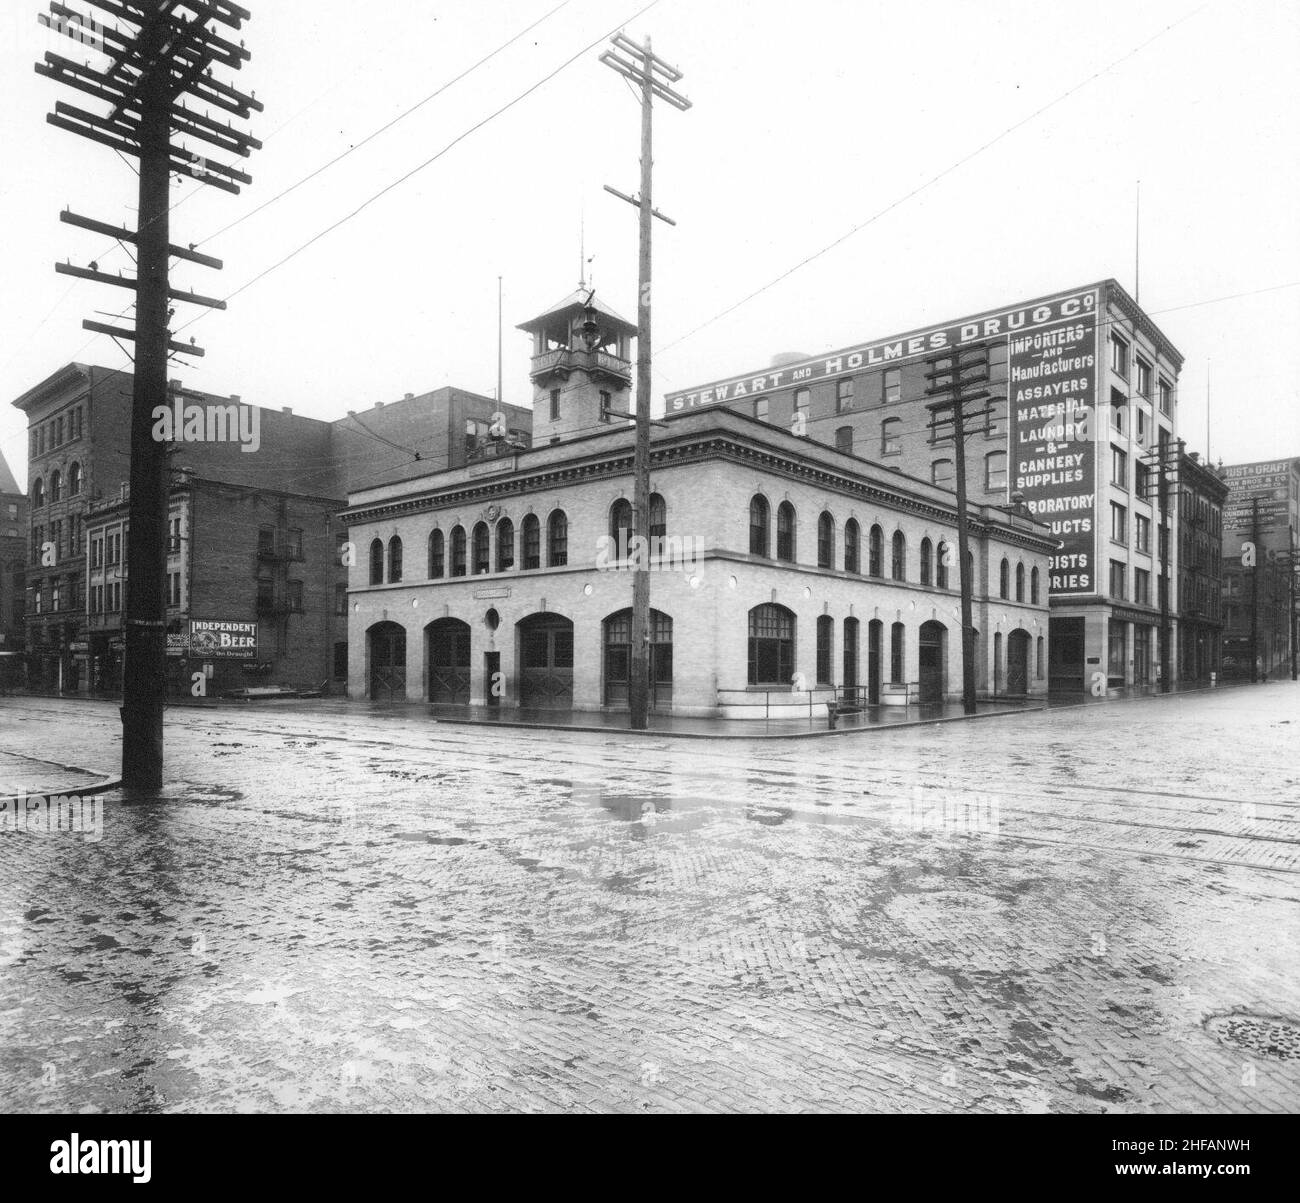 Seattle Fire Department headquarters, Firehouse No 10, northwest corner of S Main St and 3rd Ave S, Seattle, 1906 Stock Photo